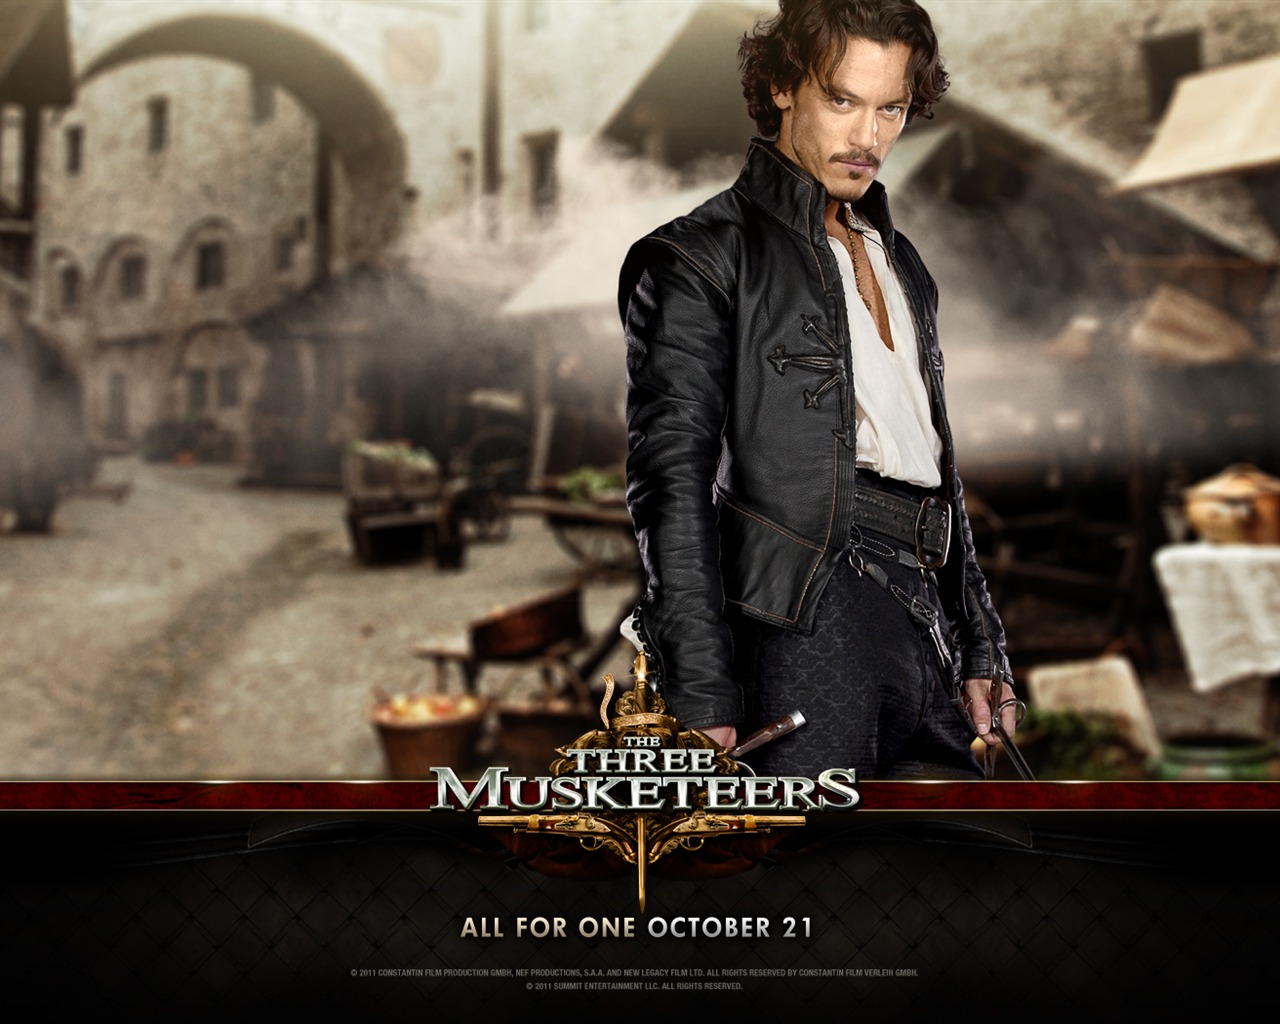 2011 The Three Musketeers wallpapers #8 - 1280x1024